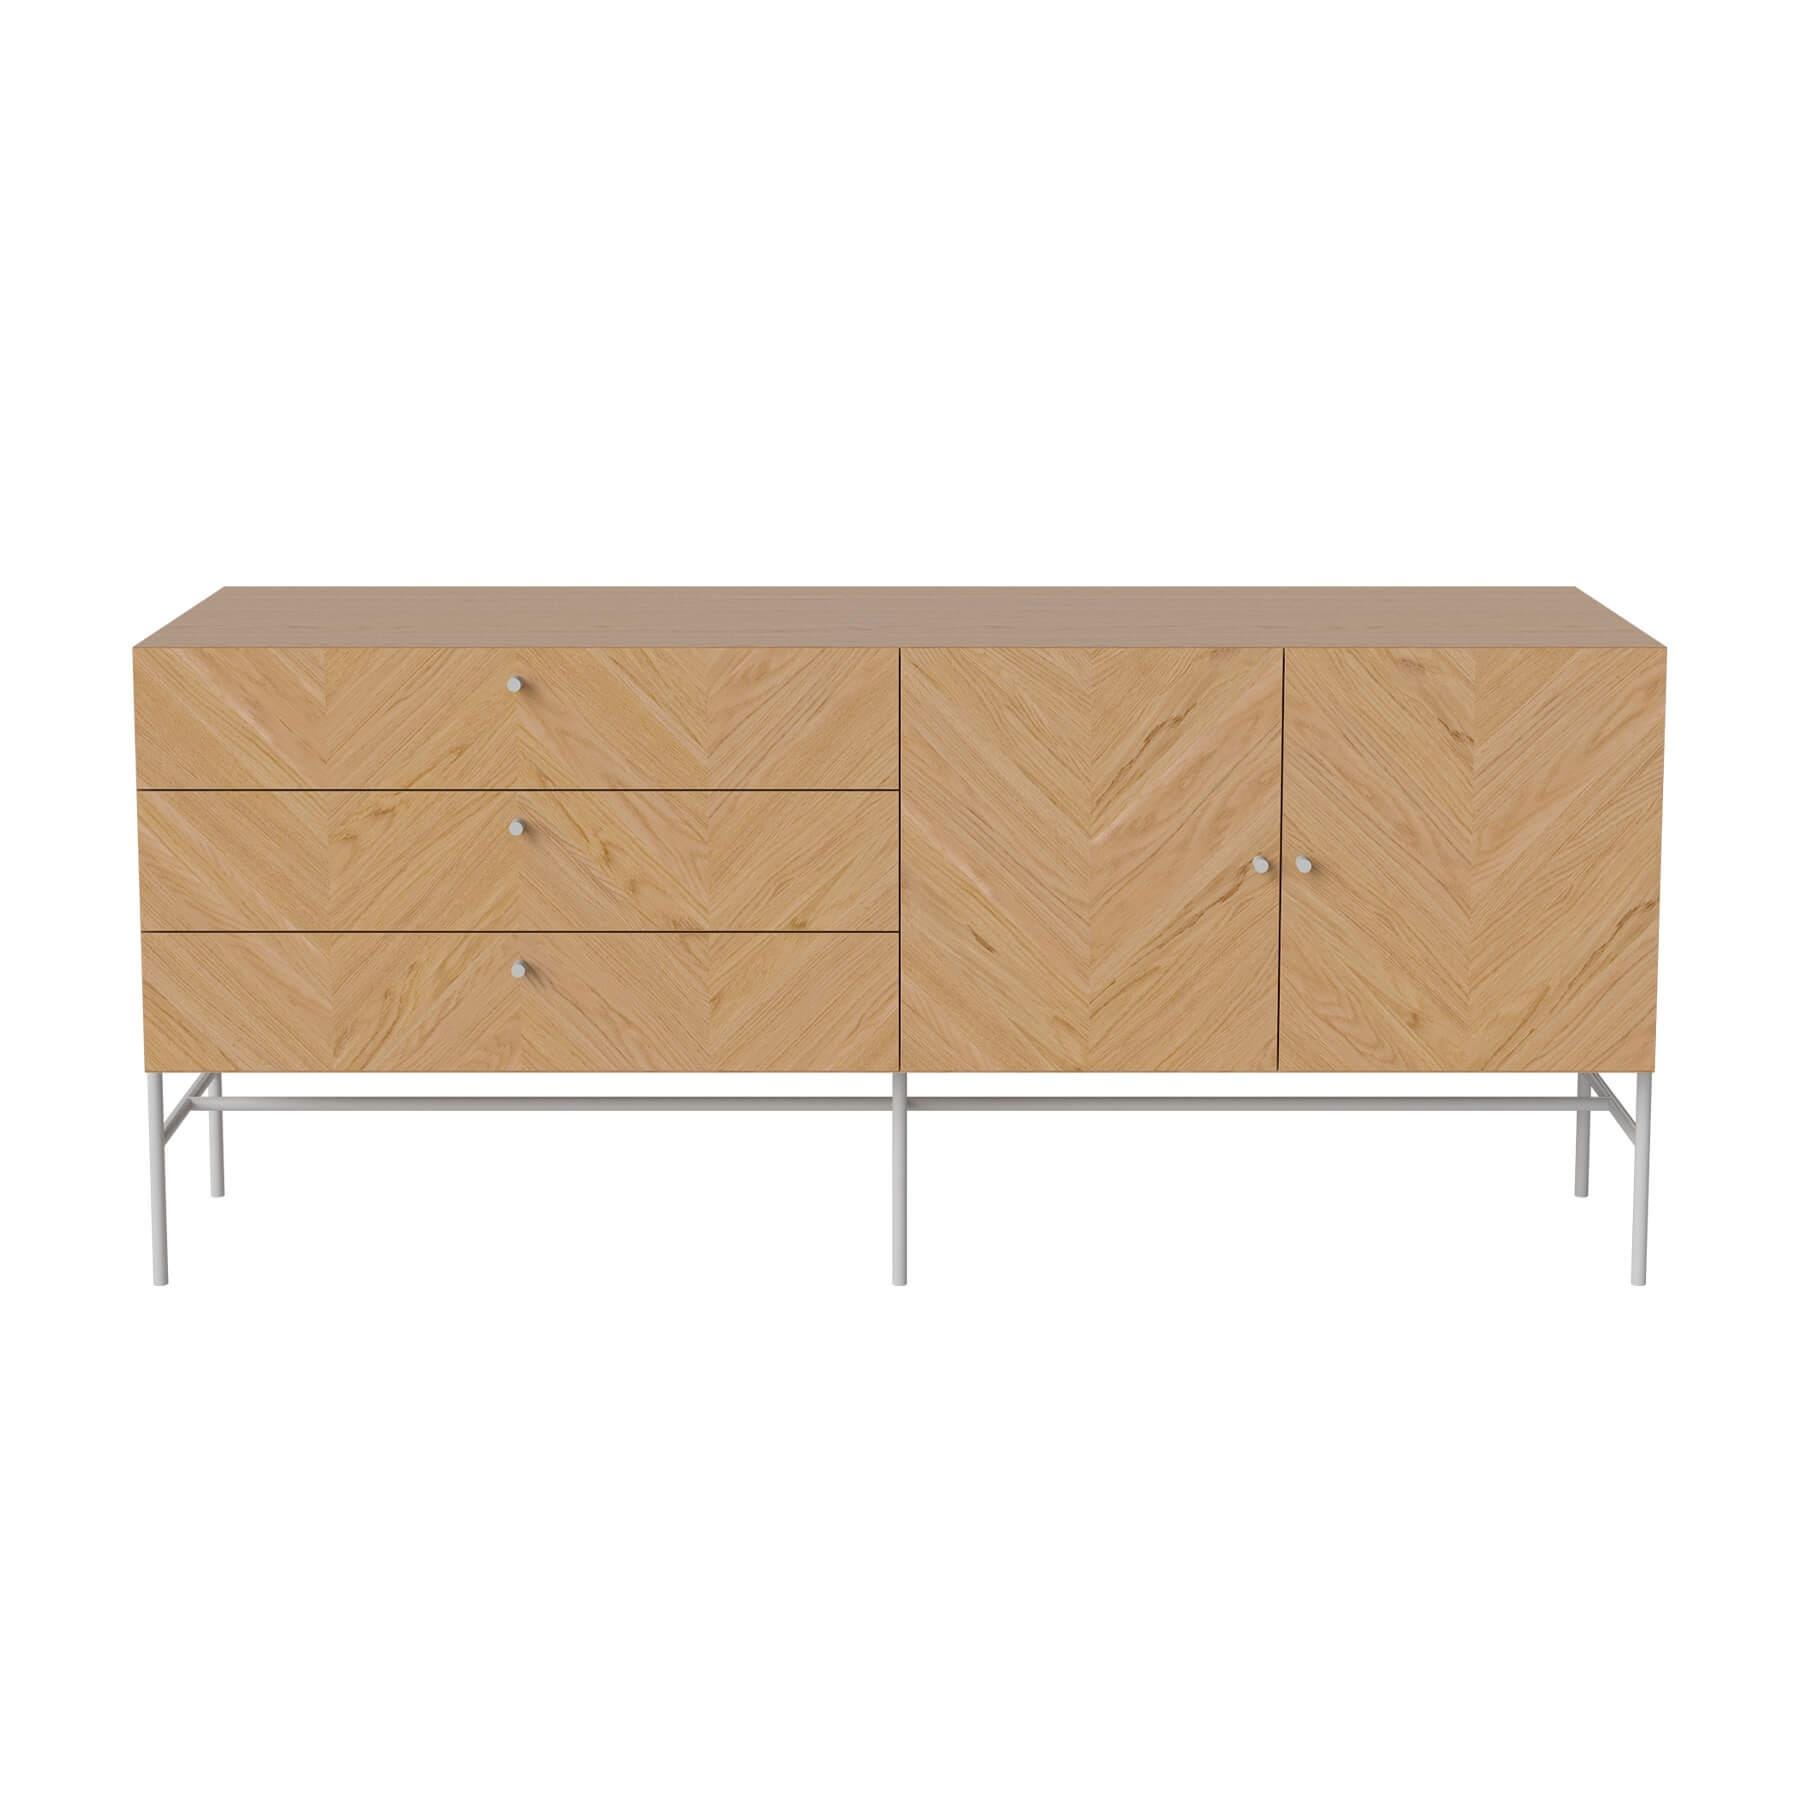 Bolia Luxe Sideboard Oiled Oak Grey Door Knobs Light Wood Designer Furniture From Holloways Of Ludlow